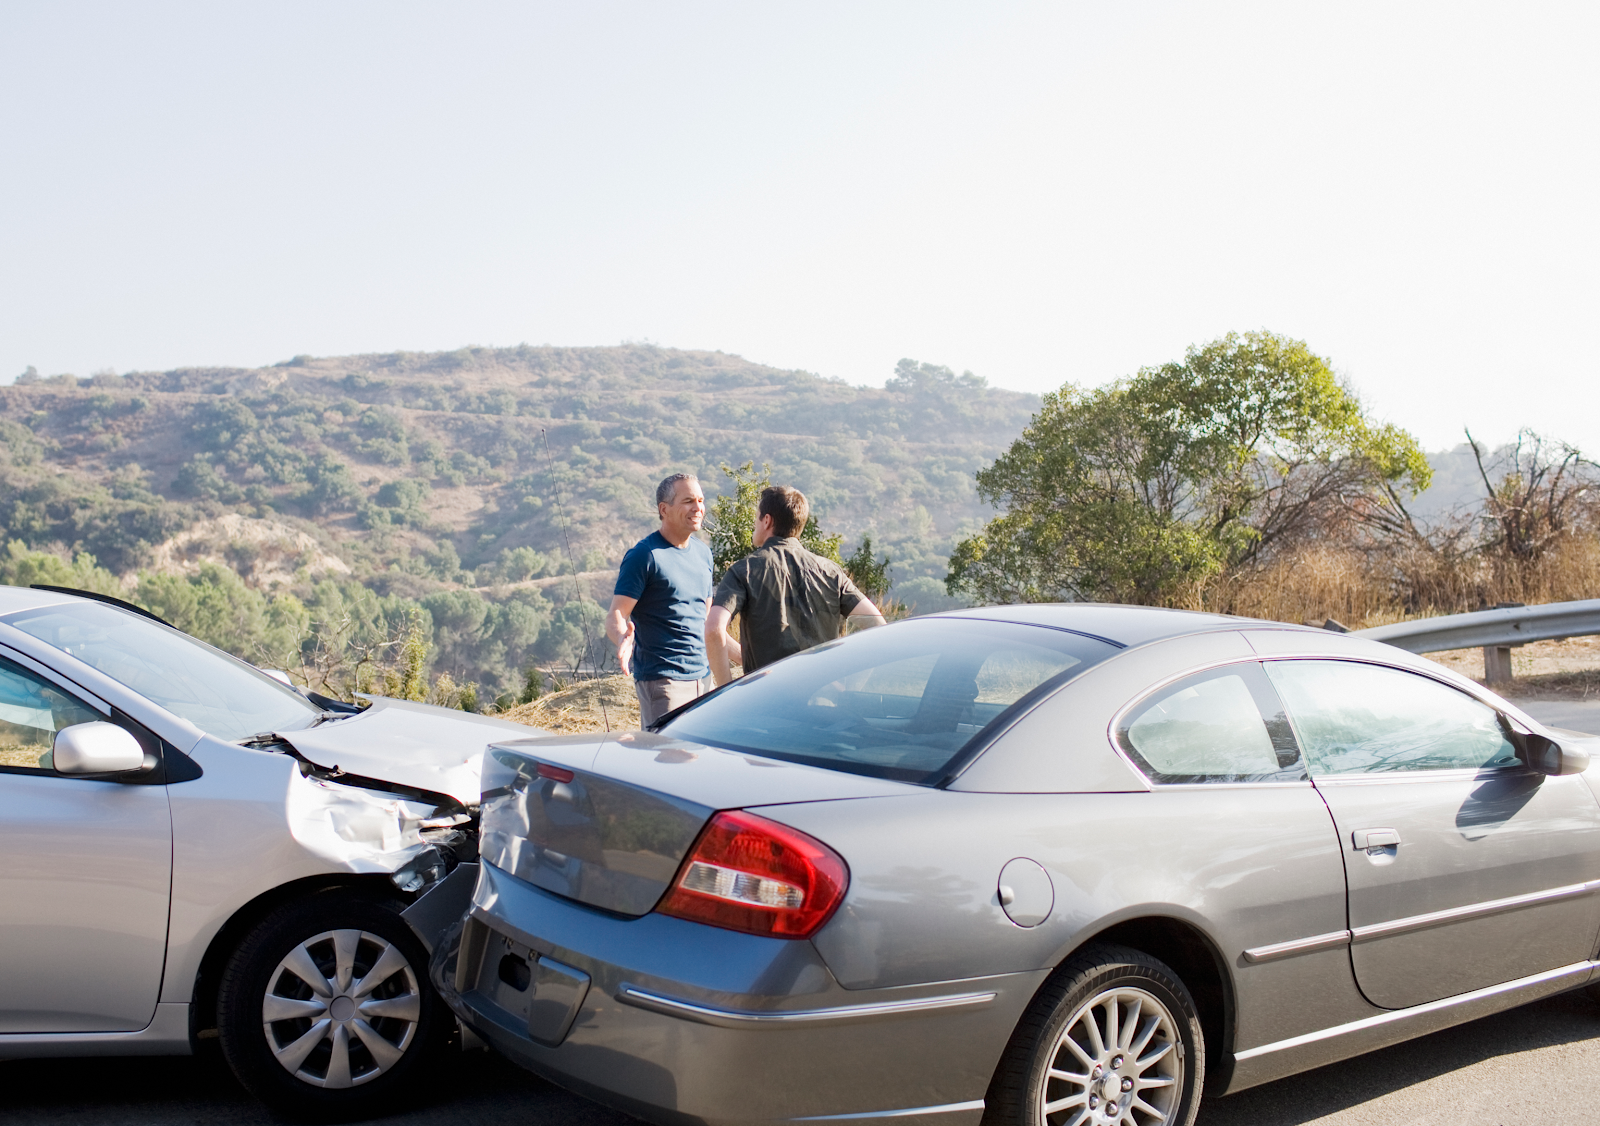 car accident in florida with nationwide insurance claims